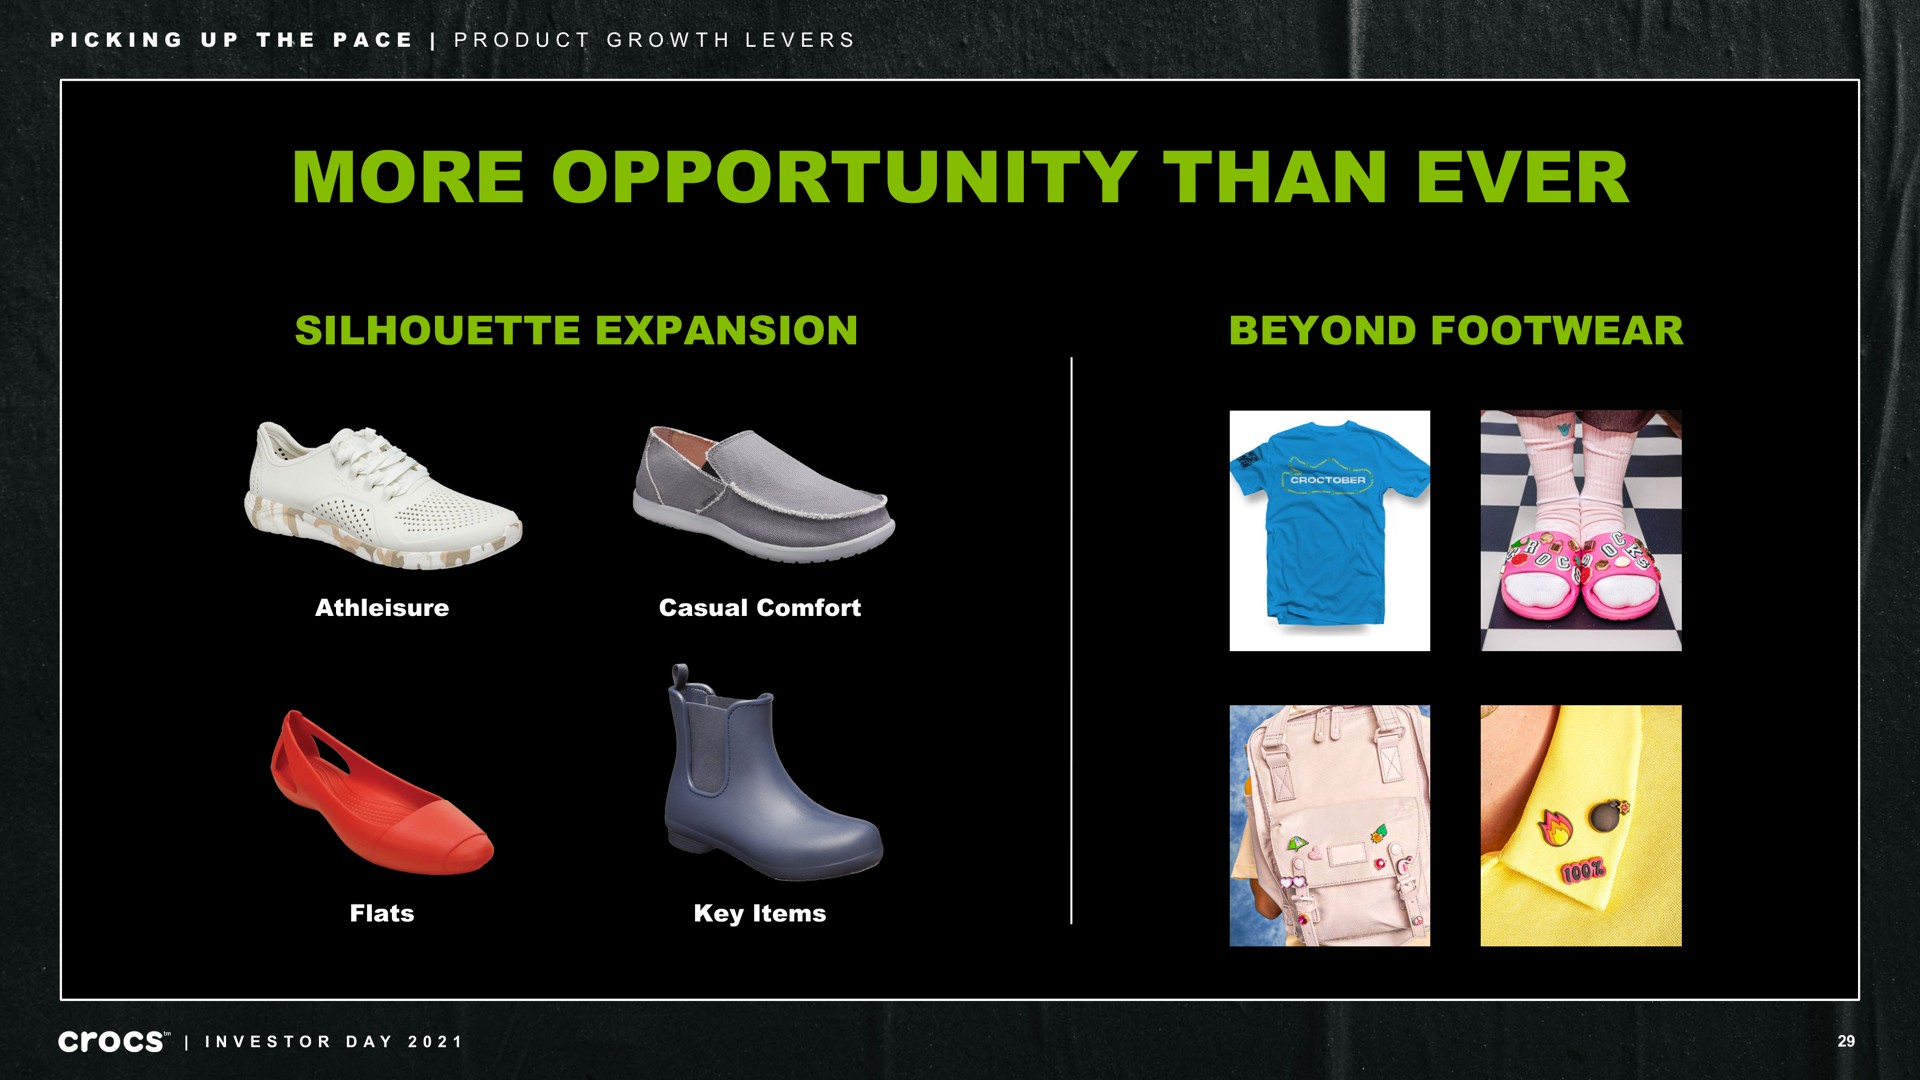 more opportunity than ever silhouette expansion beyond footwear casual comfort flats key items picking up the pace product growth levers i investor day | Crocs